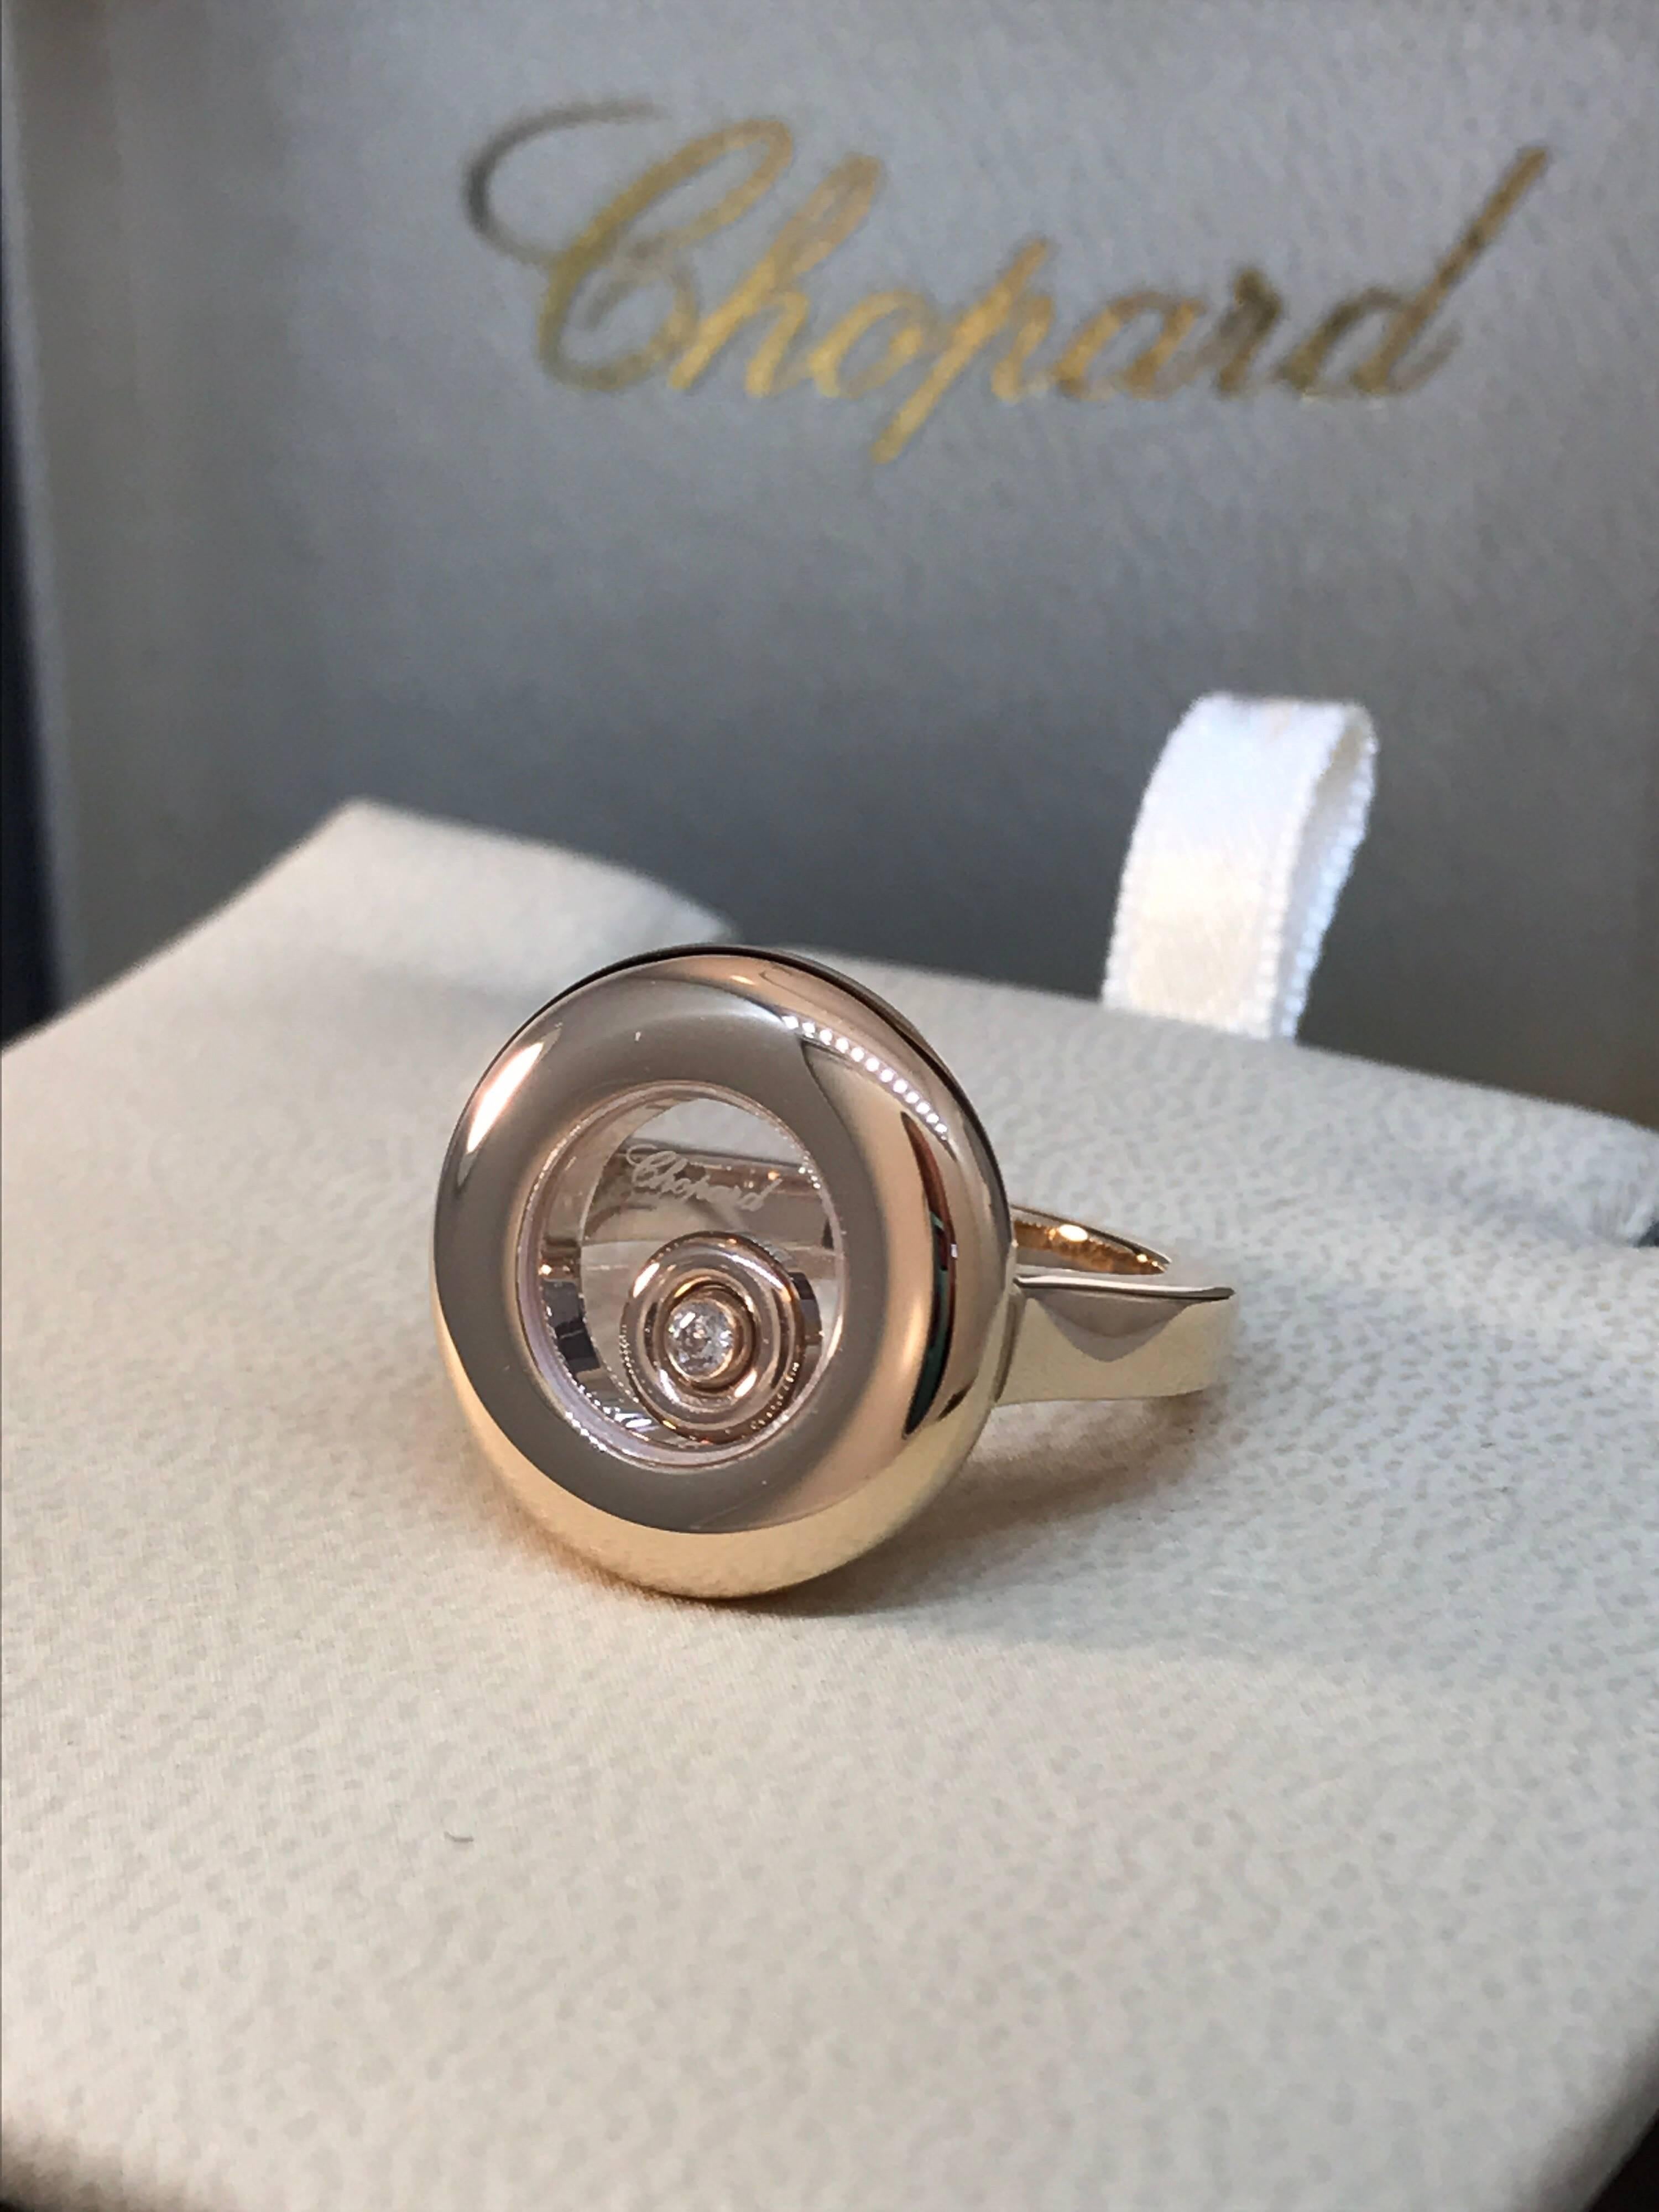 Chopard Happy Diamonds Ring

Model Number: 82/7211-5108

100% Authentic

Brand New

Comes with original Chopard box, certificate of authenticity and warranty, and jewels manual

18 Karat Rose Gold

Ring Weight: 14gr

Size 5.5 / 51

1 Floating